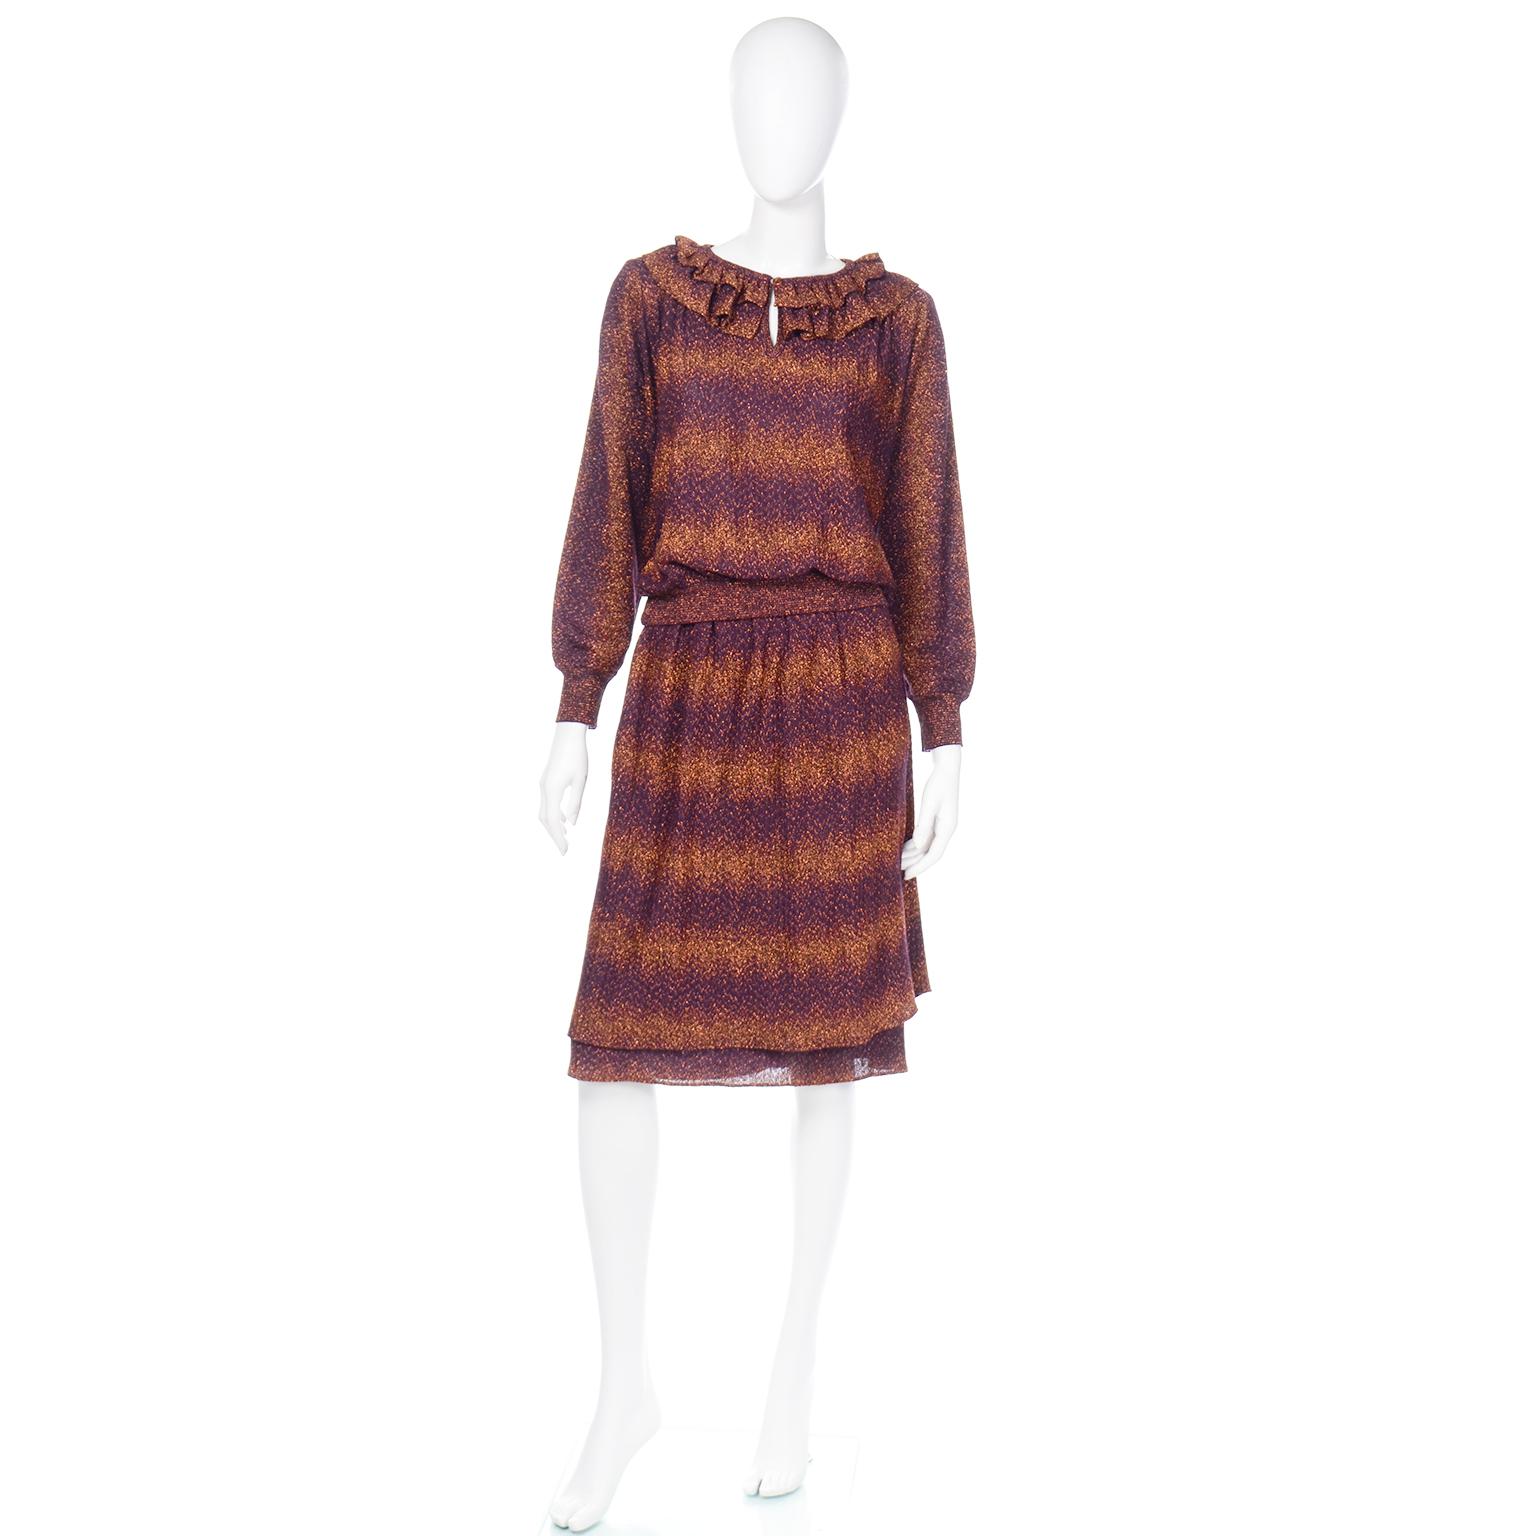 This is a wonderful vintage 1970's Missoni for Saks Fifth Avenue purple knit with metallic bronze lurex details. We love this outfit because you can wear each of the pieces separately or wear them together as a 2 piece dress.  The top of this set